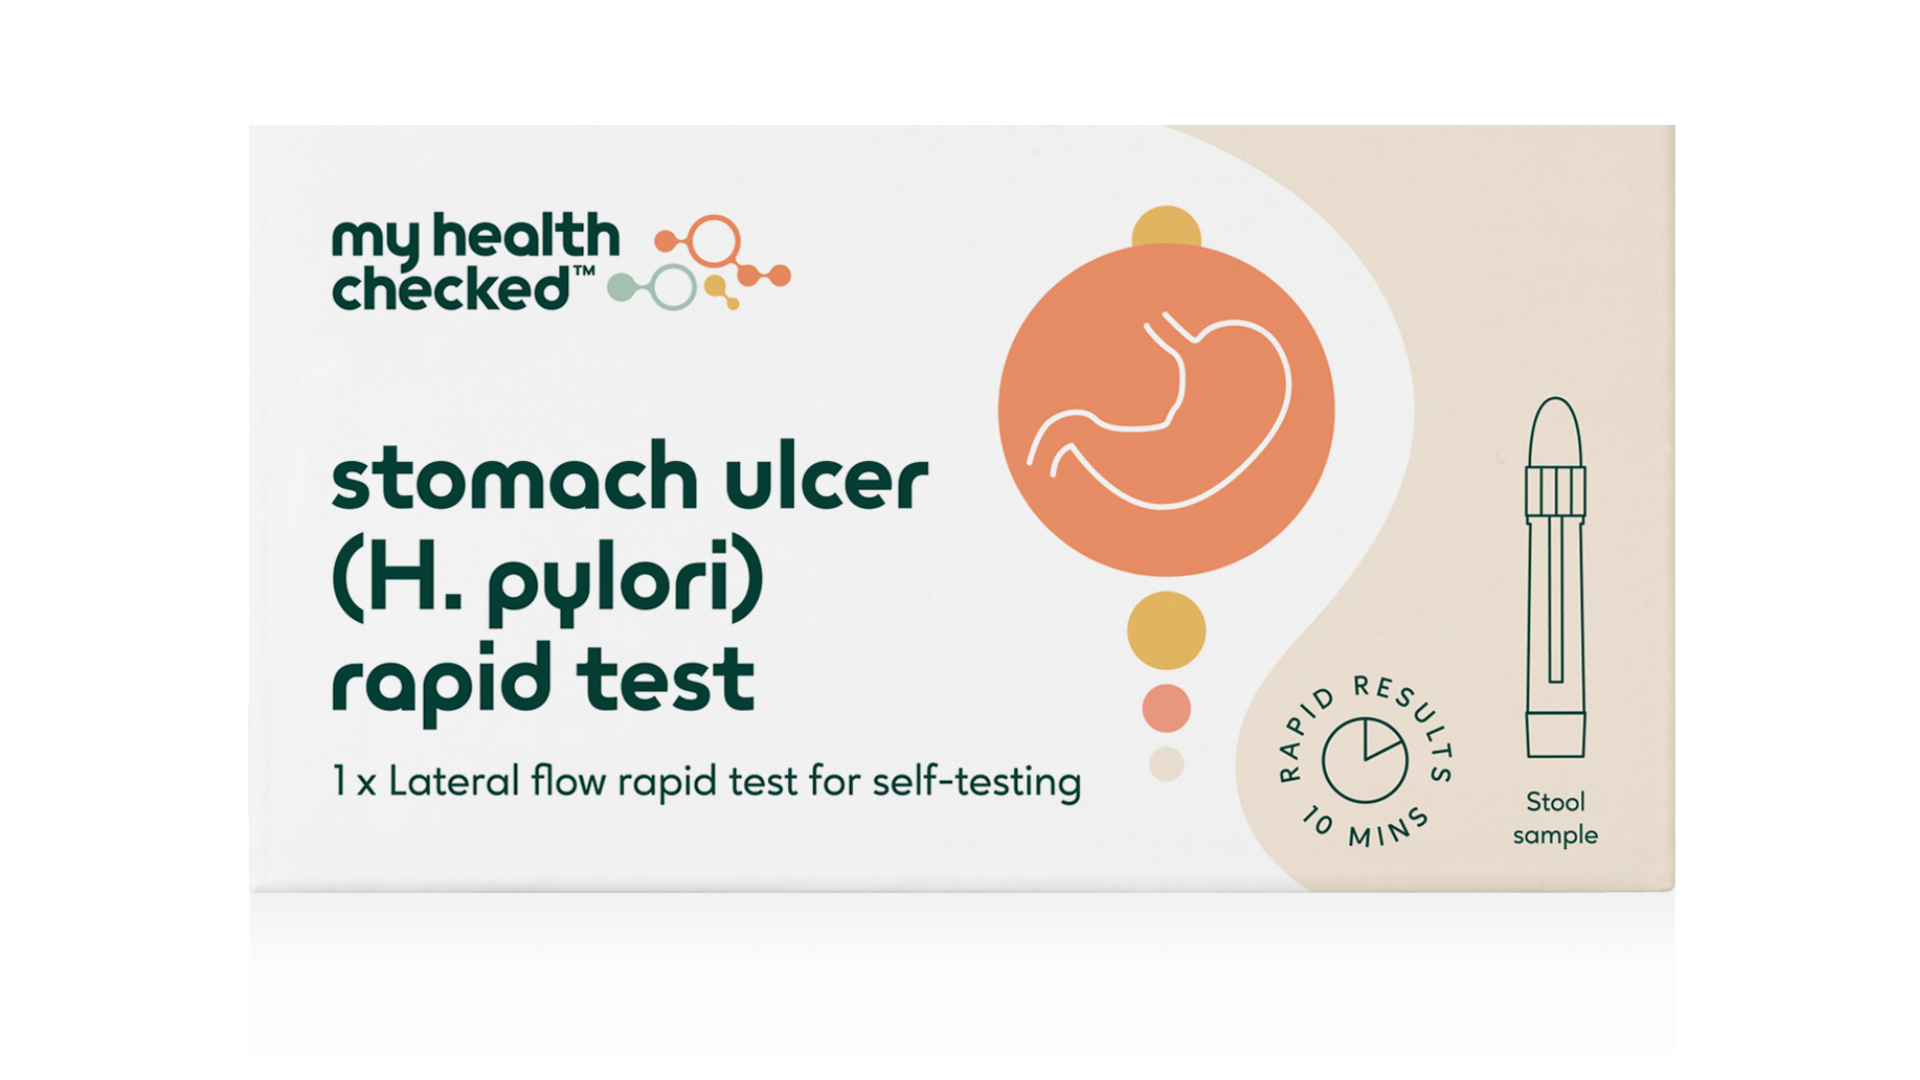 MyHealthChecked's Stomach Ulcer (H. pylori) Rapid Test